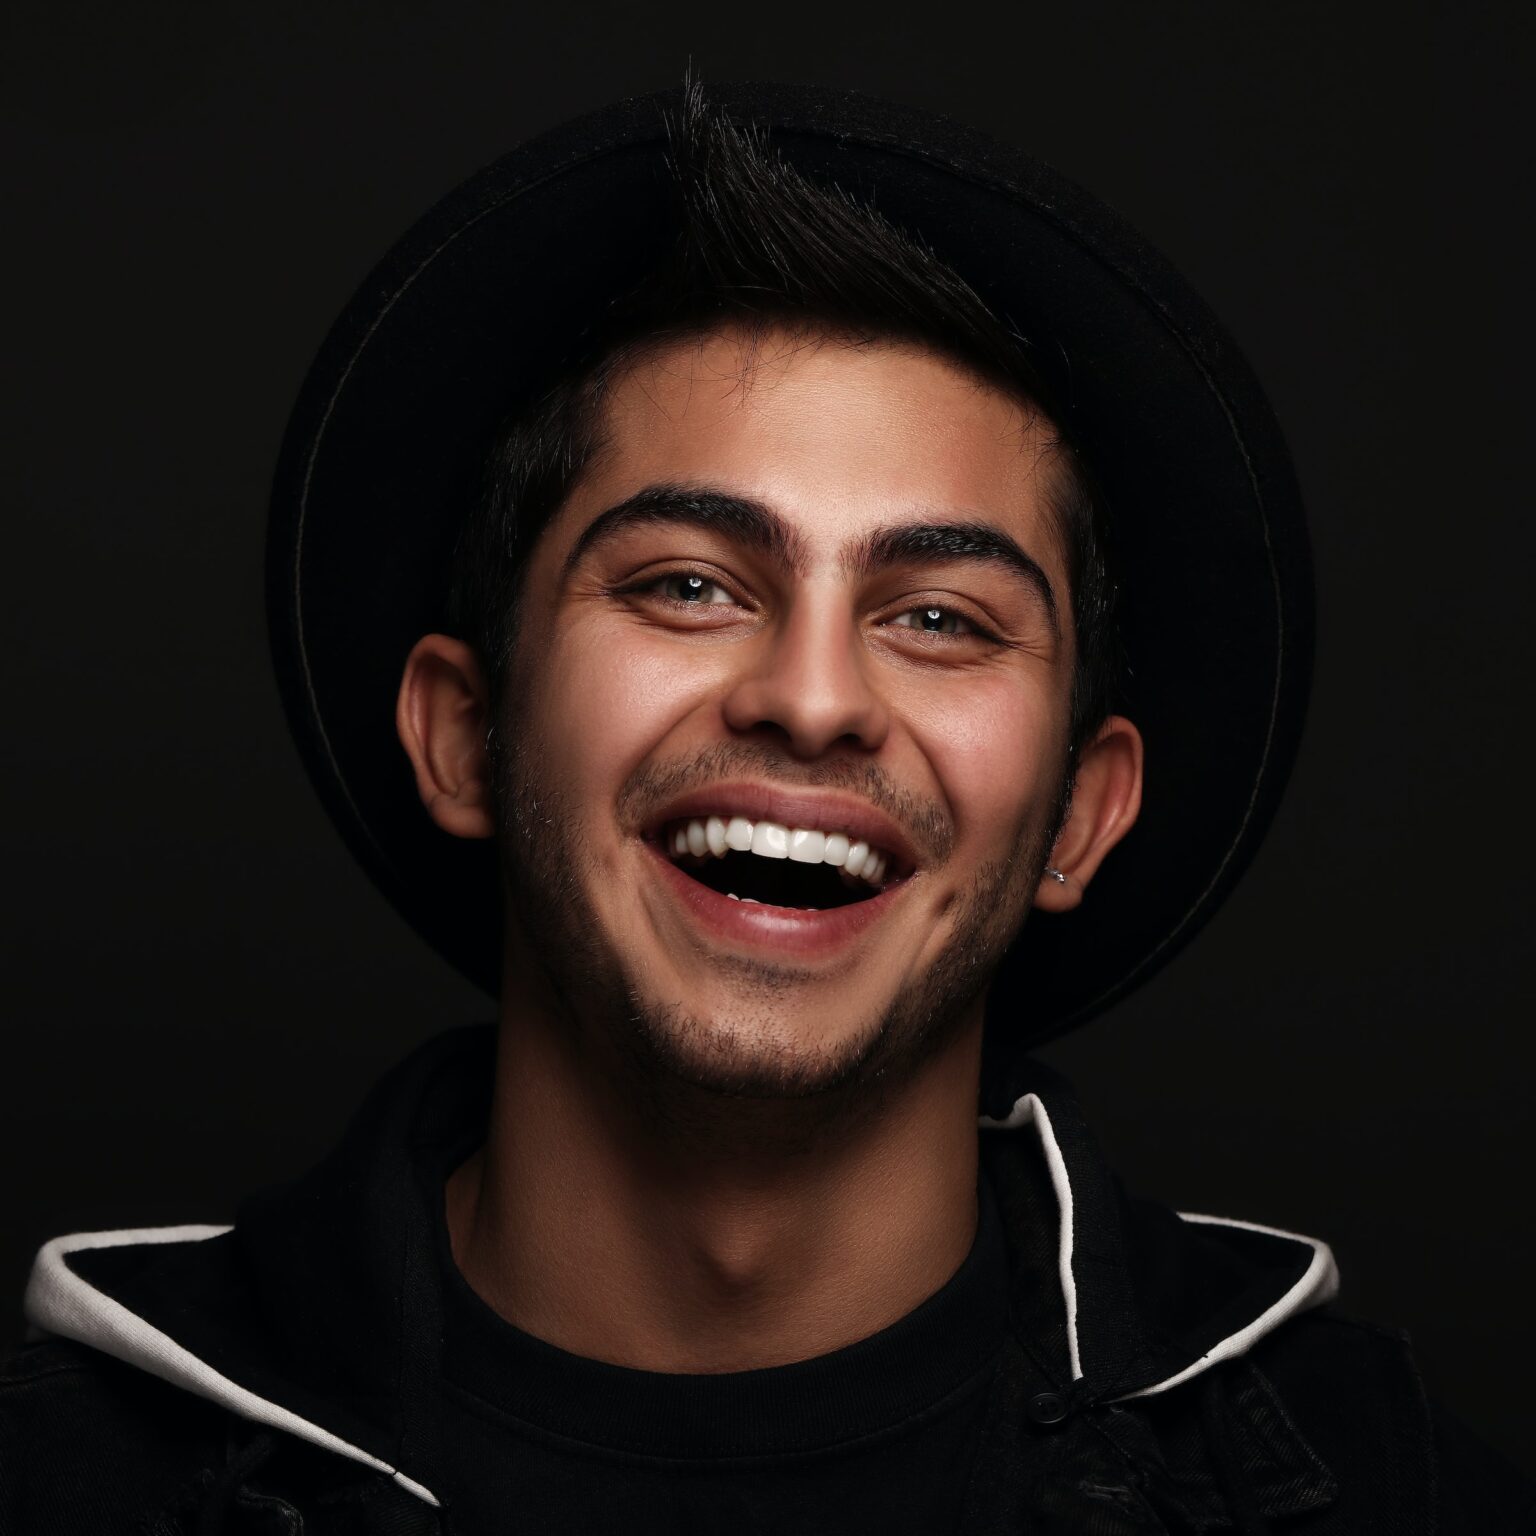 A smiling young man wearing a black hat against a dark background of a Texas dentistry office.